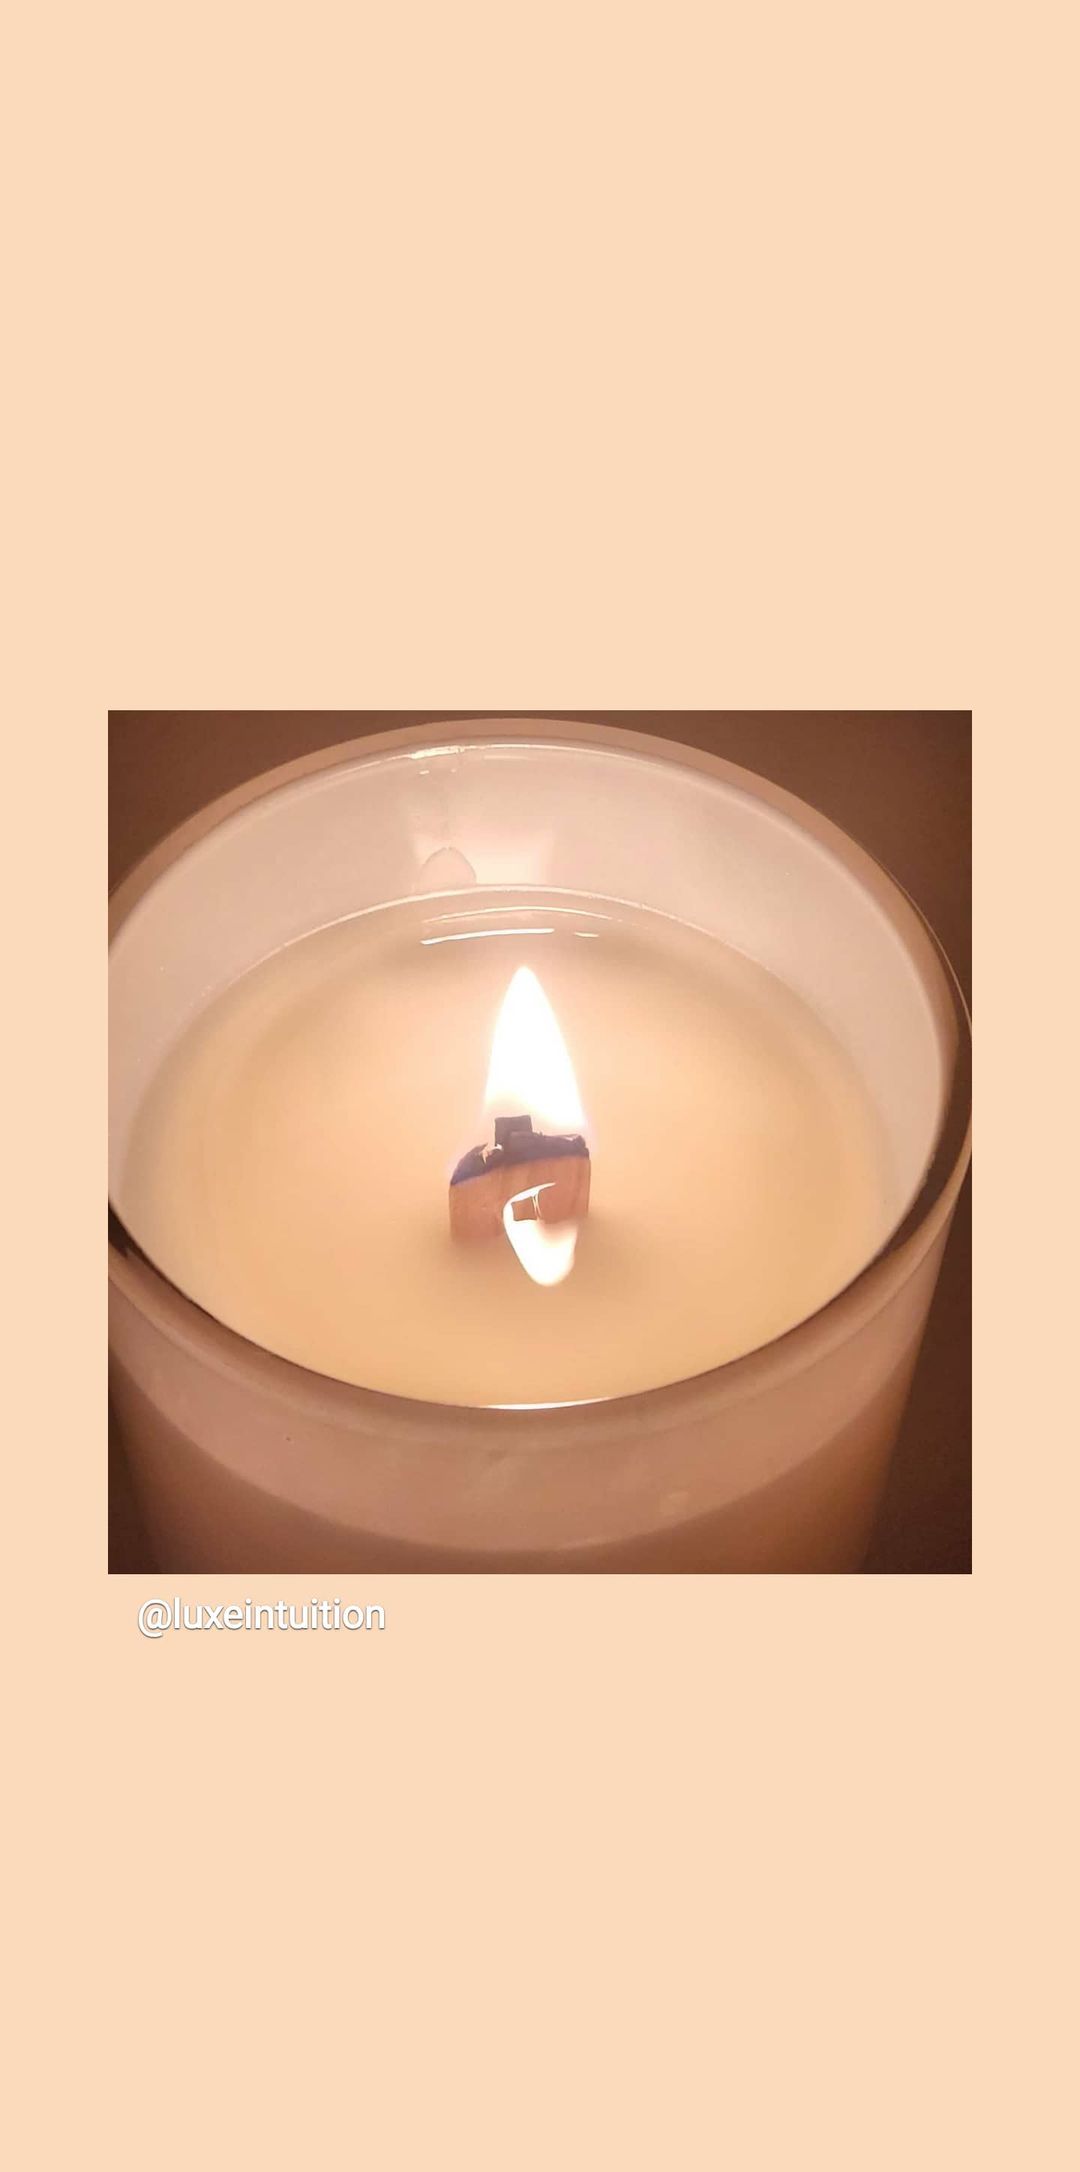 The Sophisticate Candle 8 oz, Luxury Scented Candle, Vegan Candle - Luxe  Intuition, Wooden Wick Candles